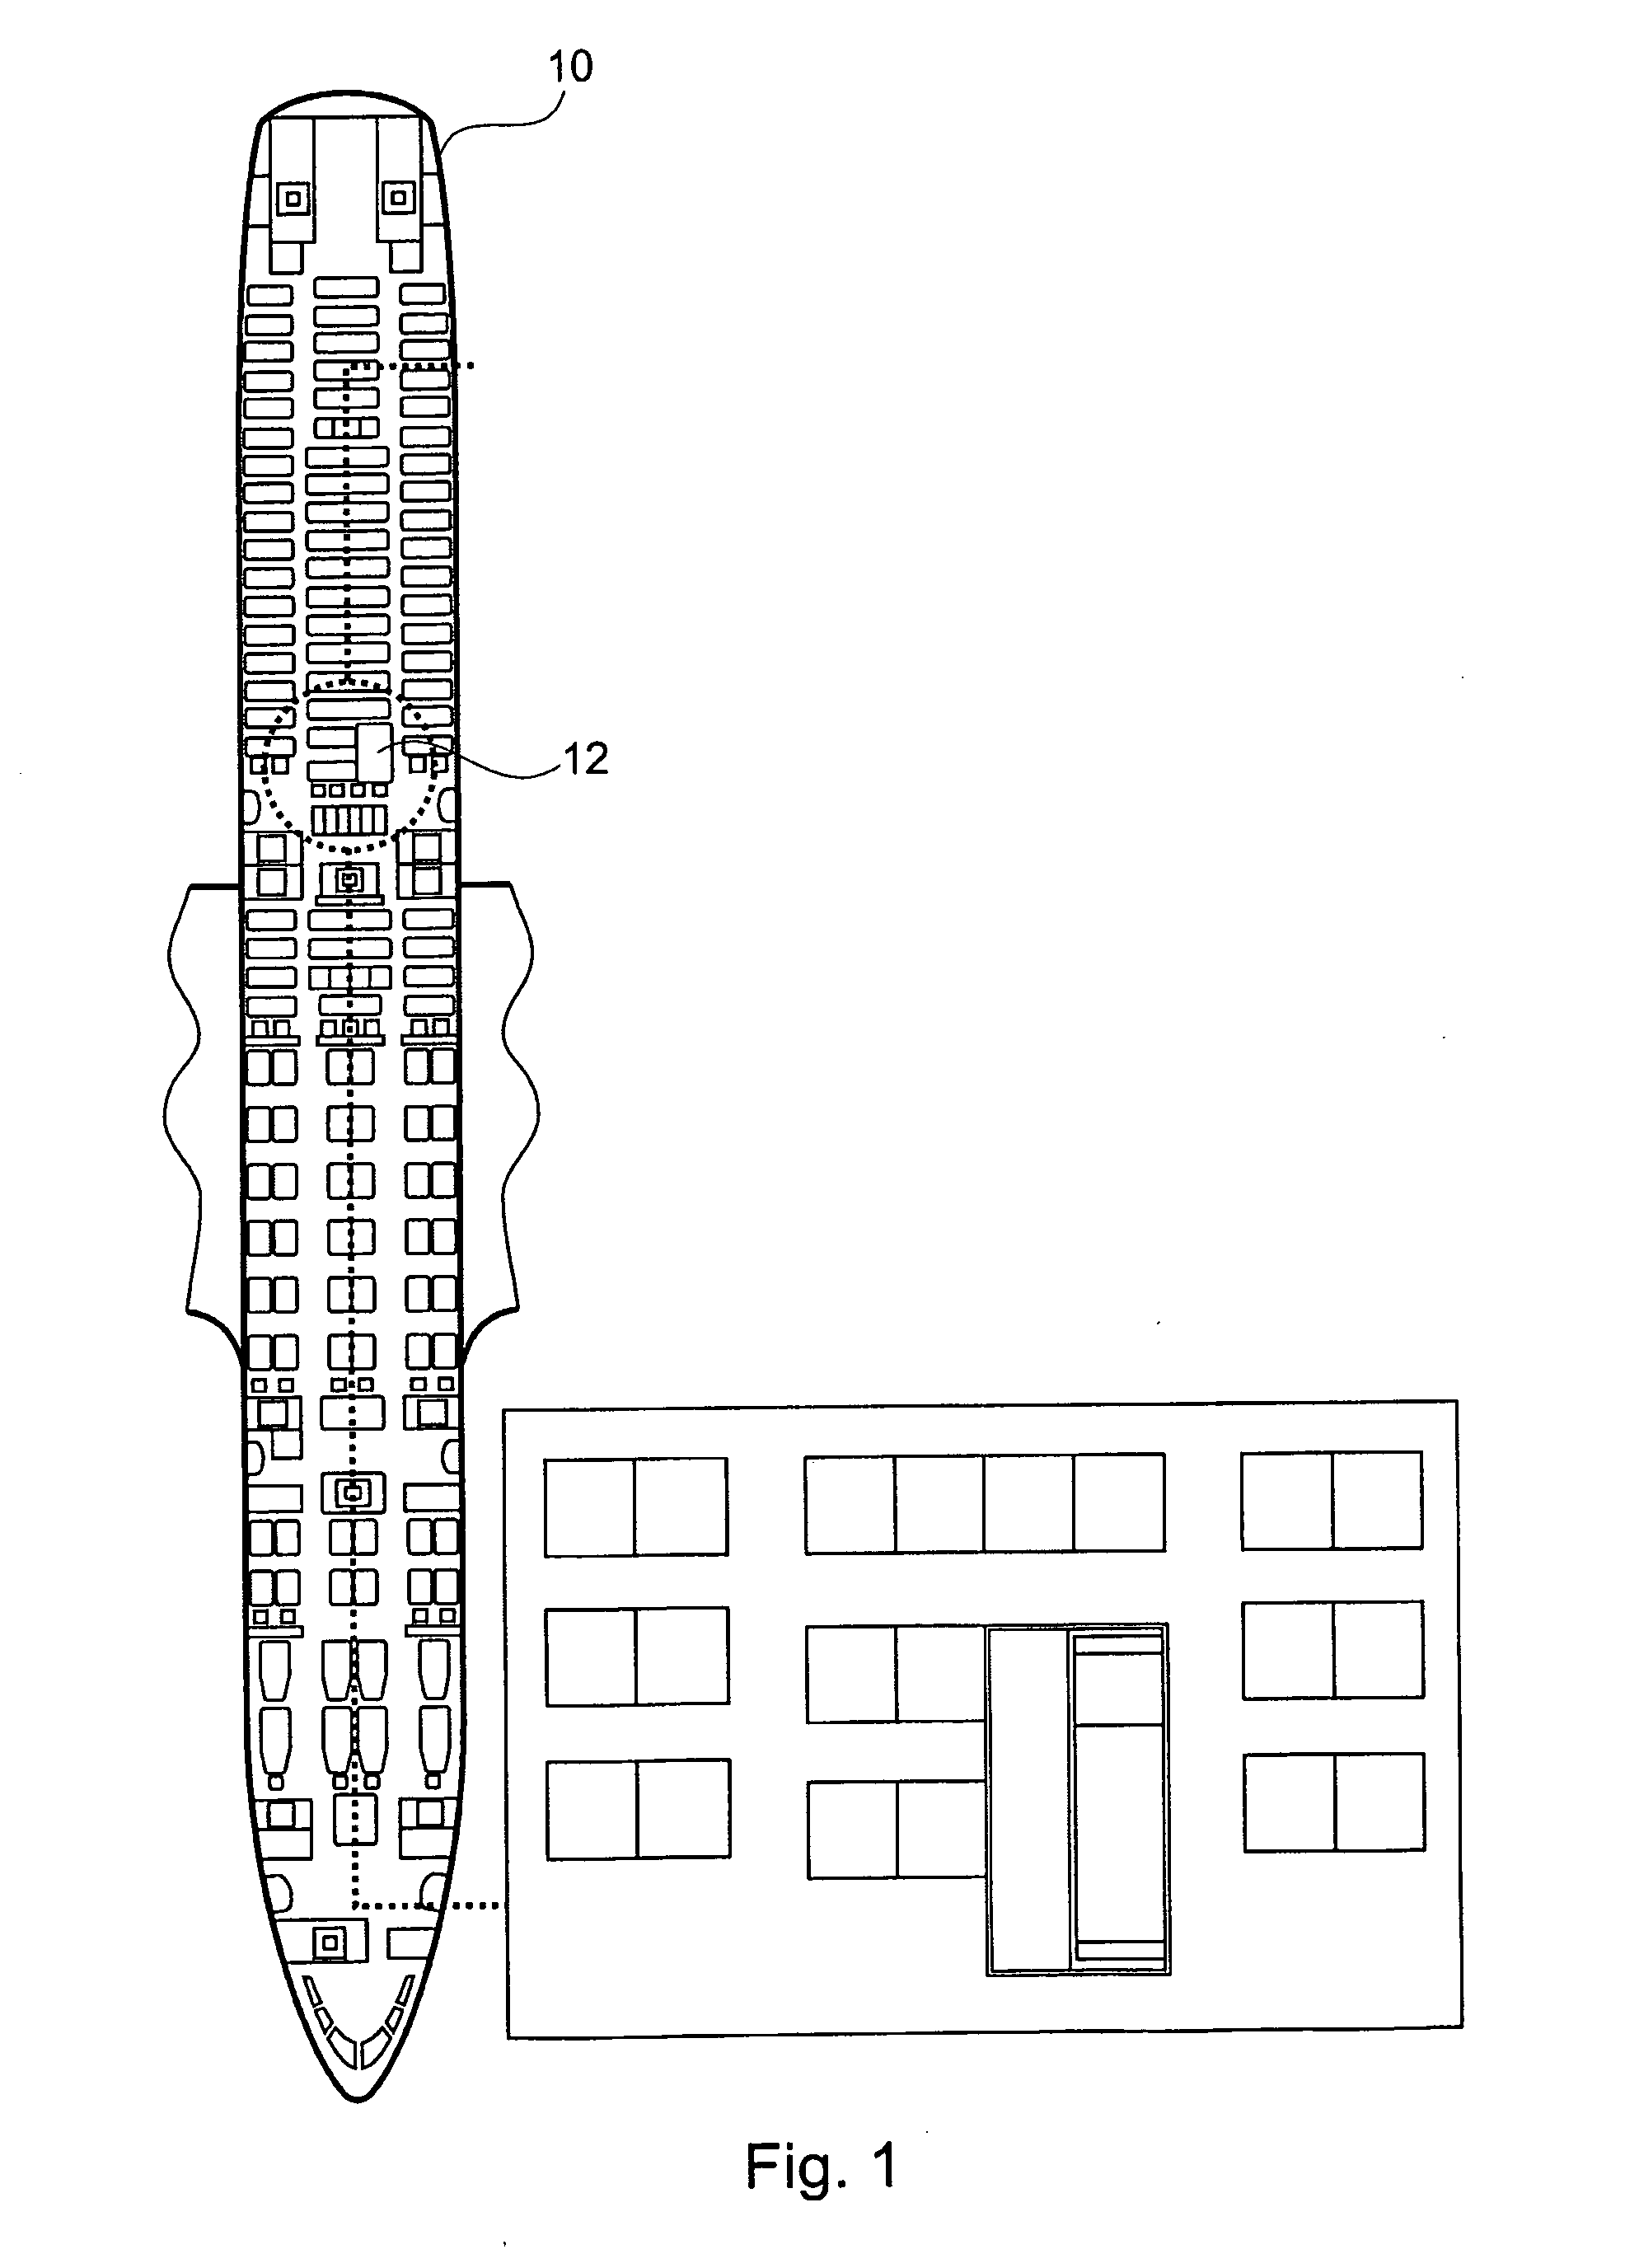 Device for the transport and medical care of patients as well as for the provision of emergency medical care in an aircraft